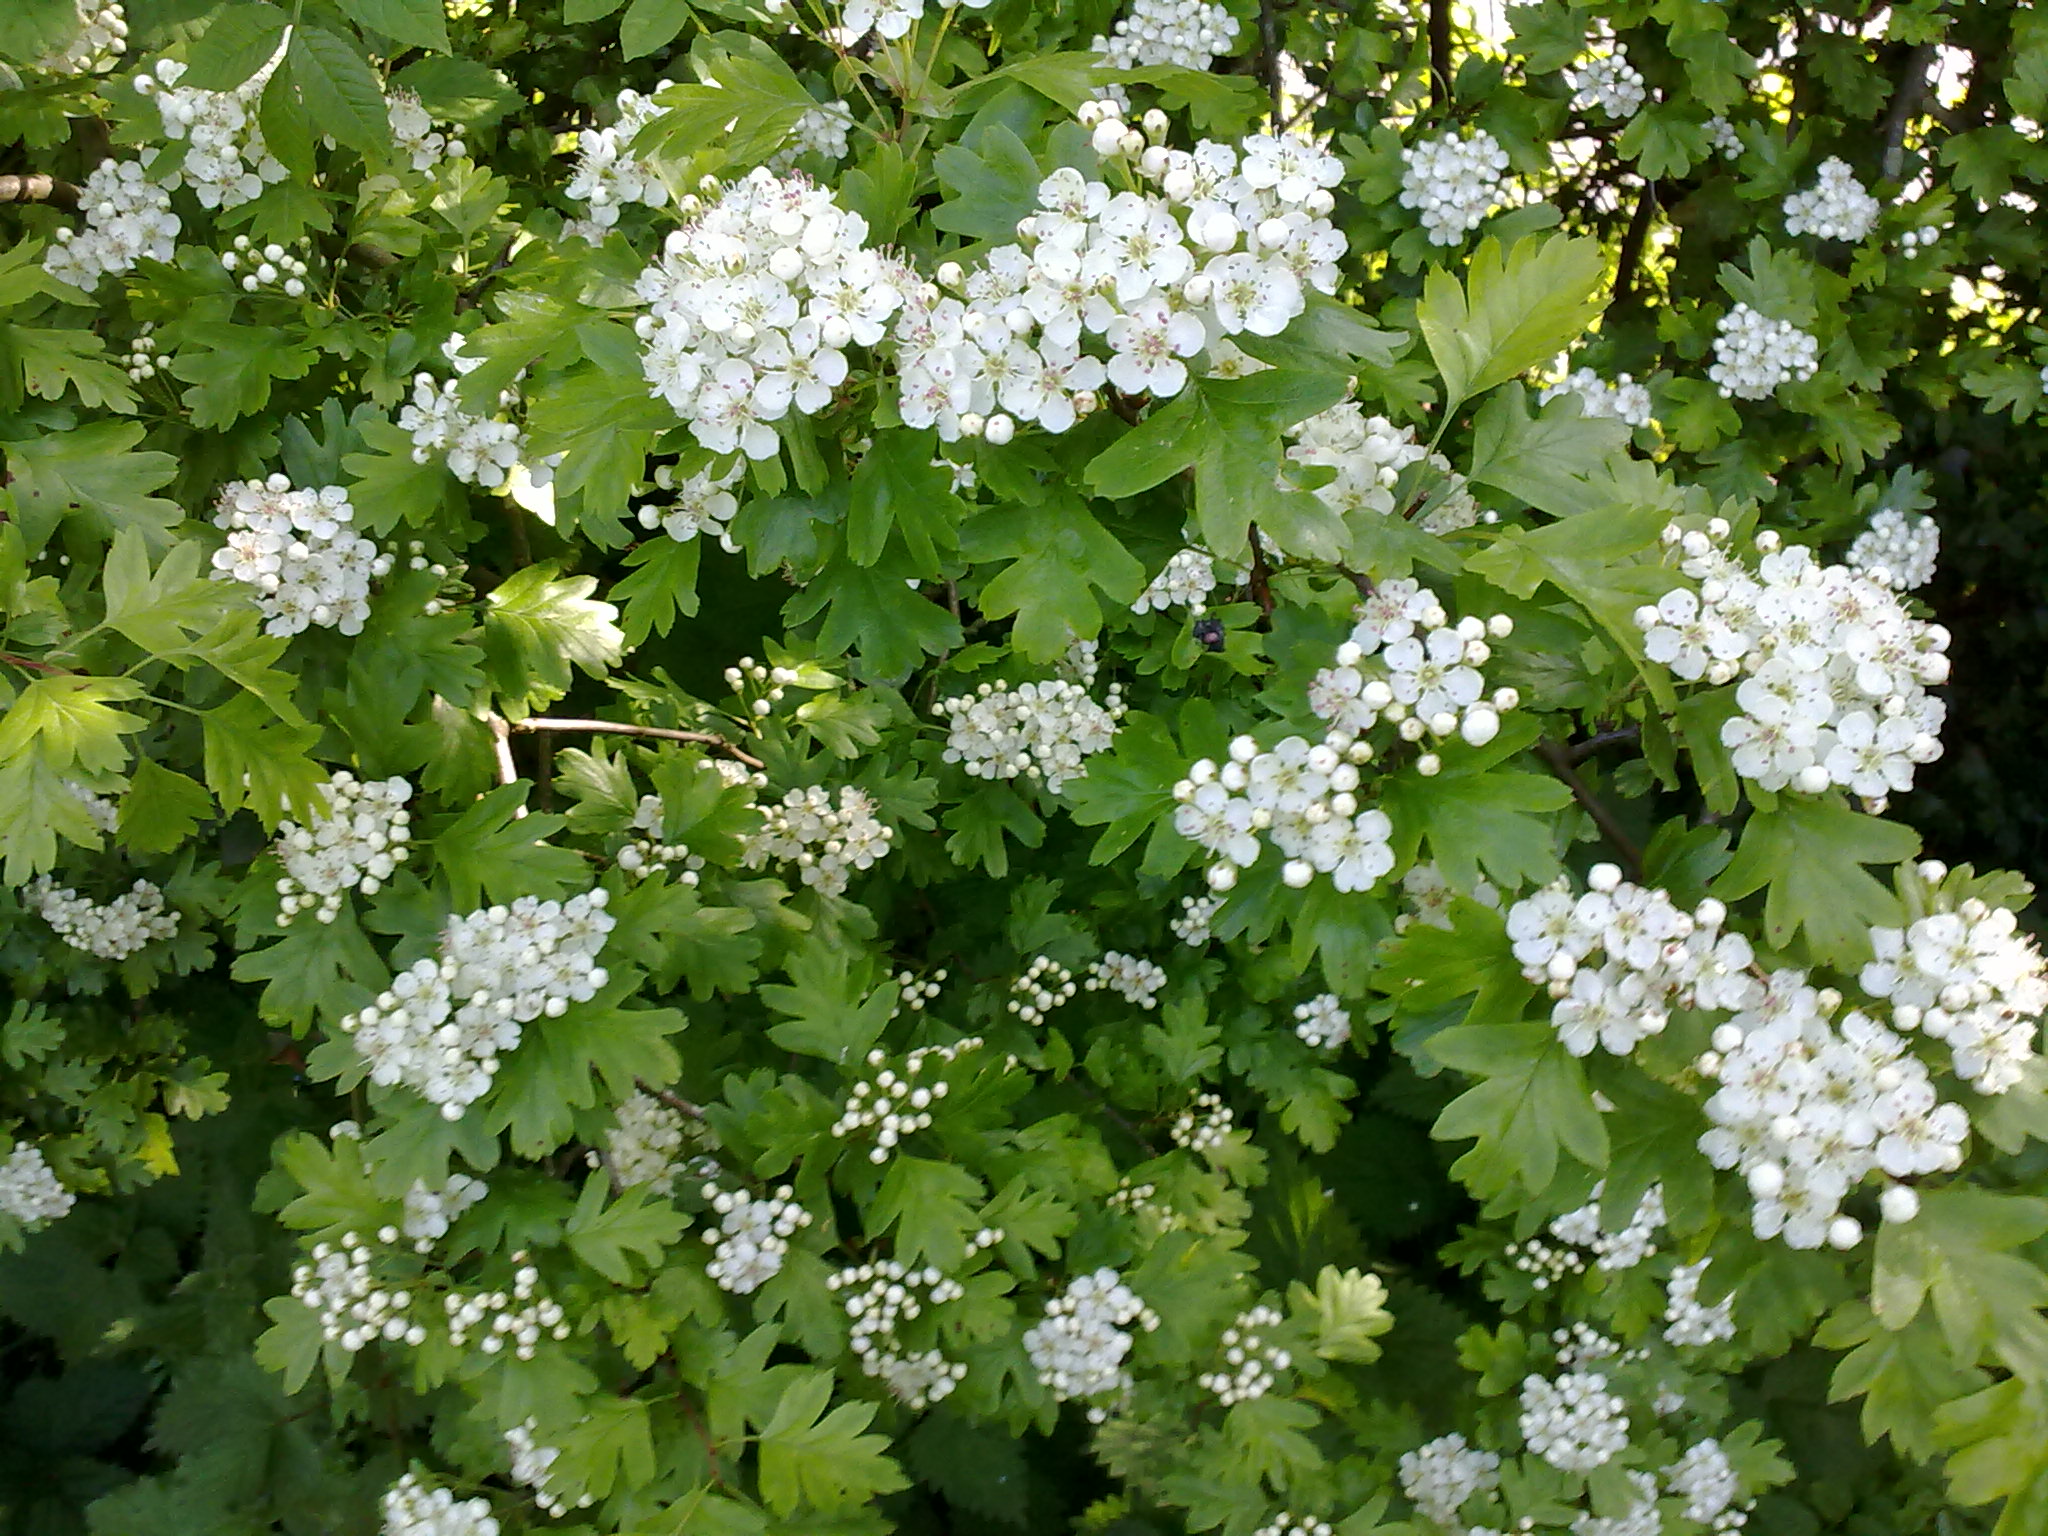 a closeup view of small white flowers and green leaves